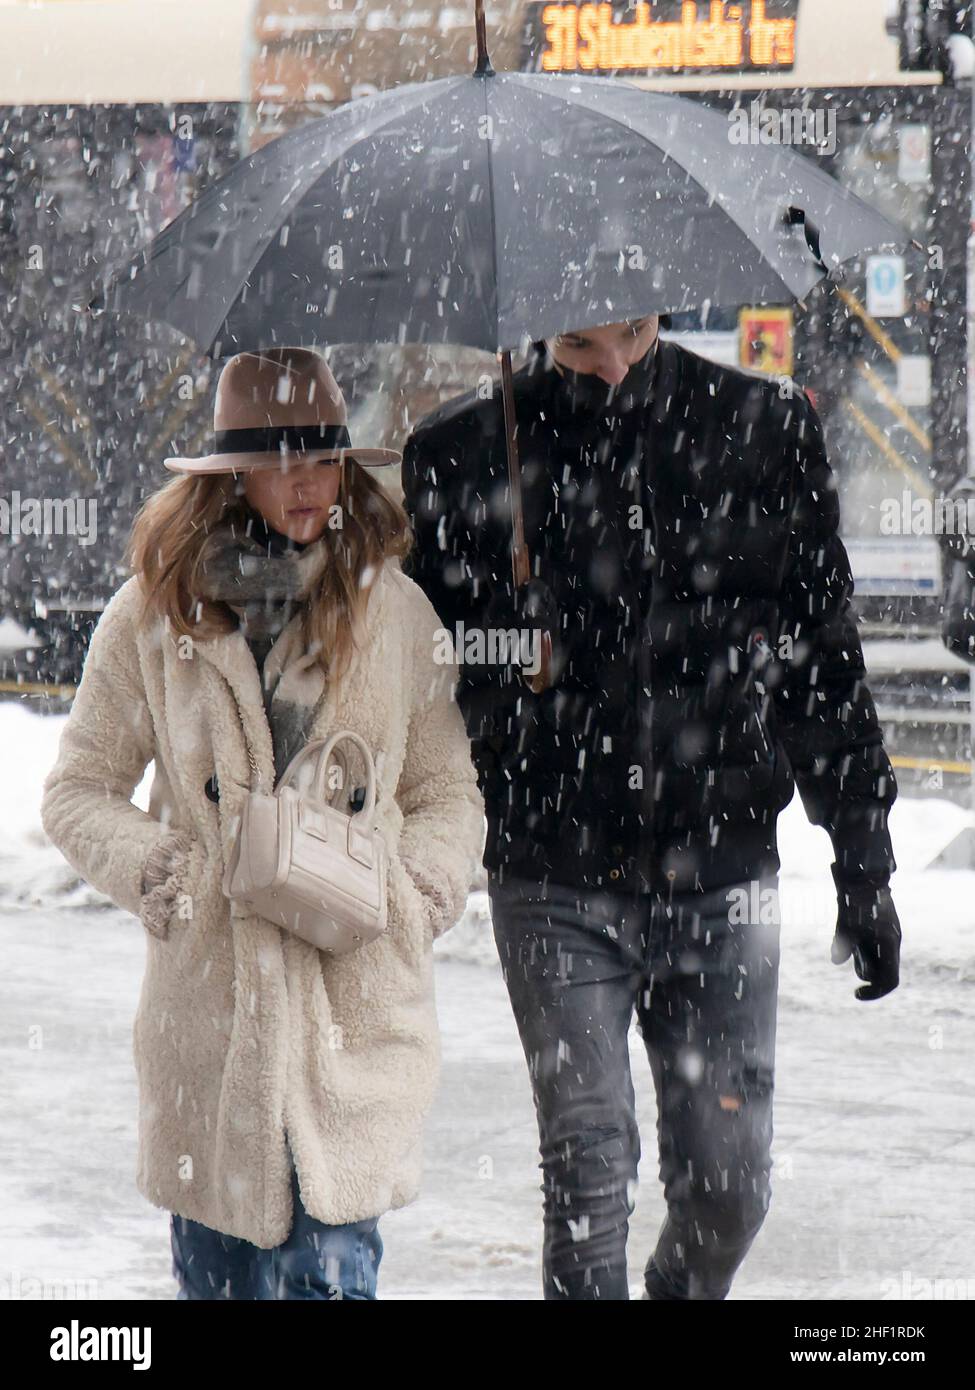 Belgrade, Serbia - January 11, 2022: Two young people walking under umbrella on a snowy winter day in the city Stock Photo